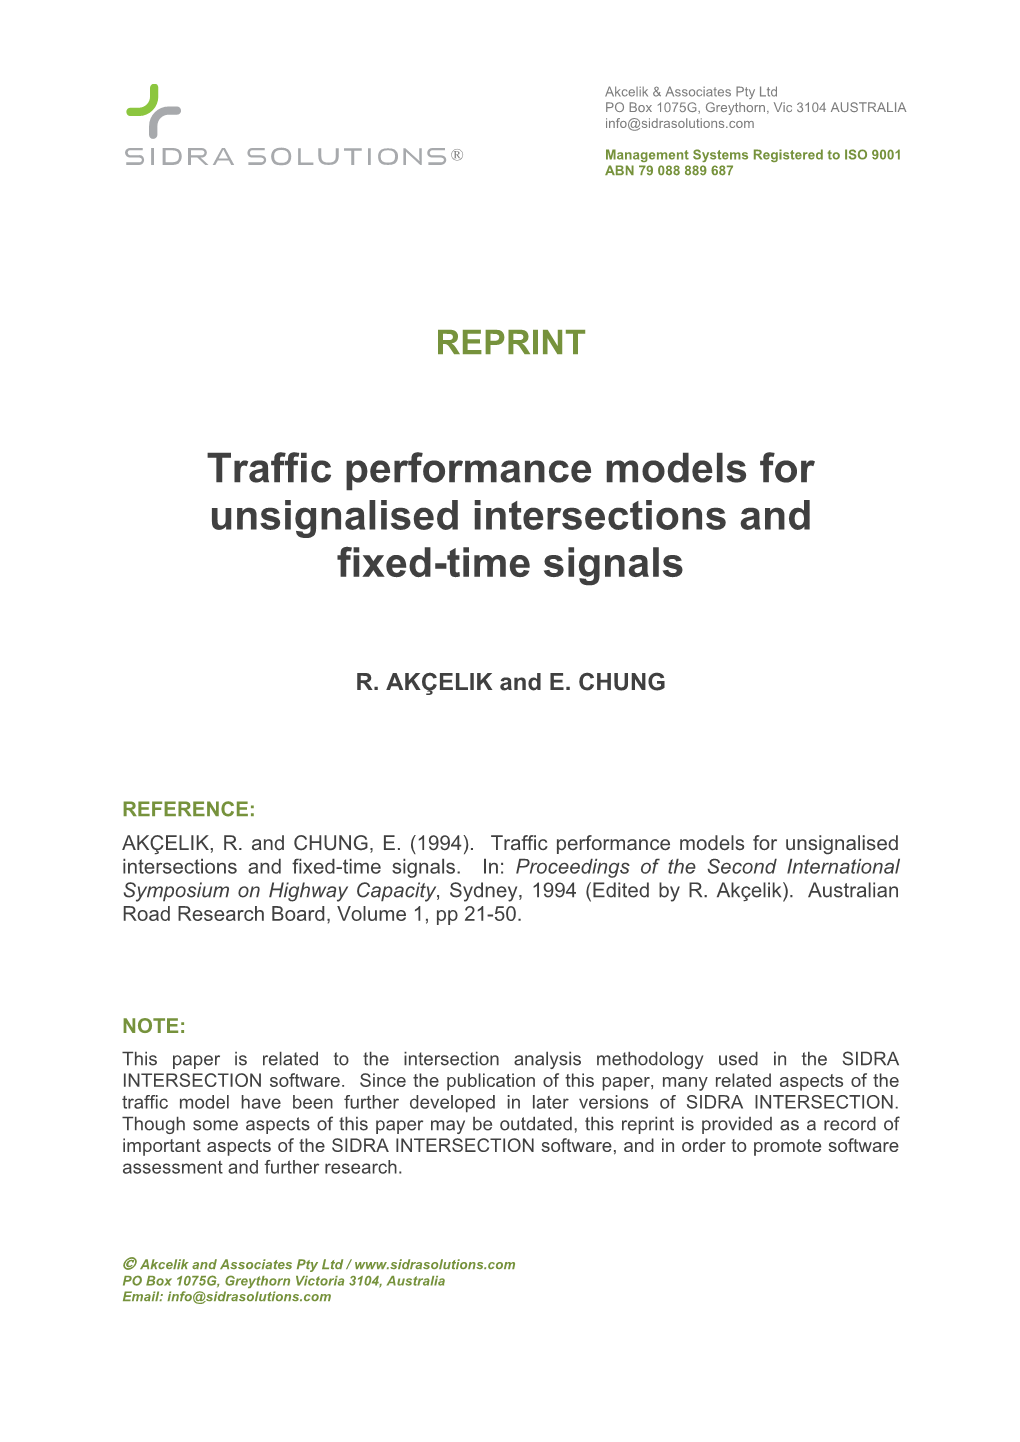 Download Publicationtraffic Performance Models for Unsignalised Intersections and Fixed-Time Signals